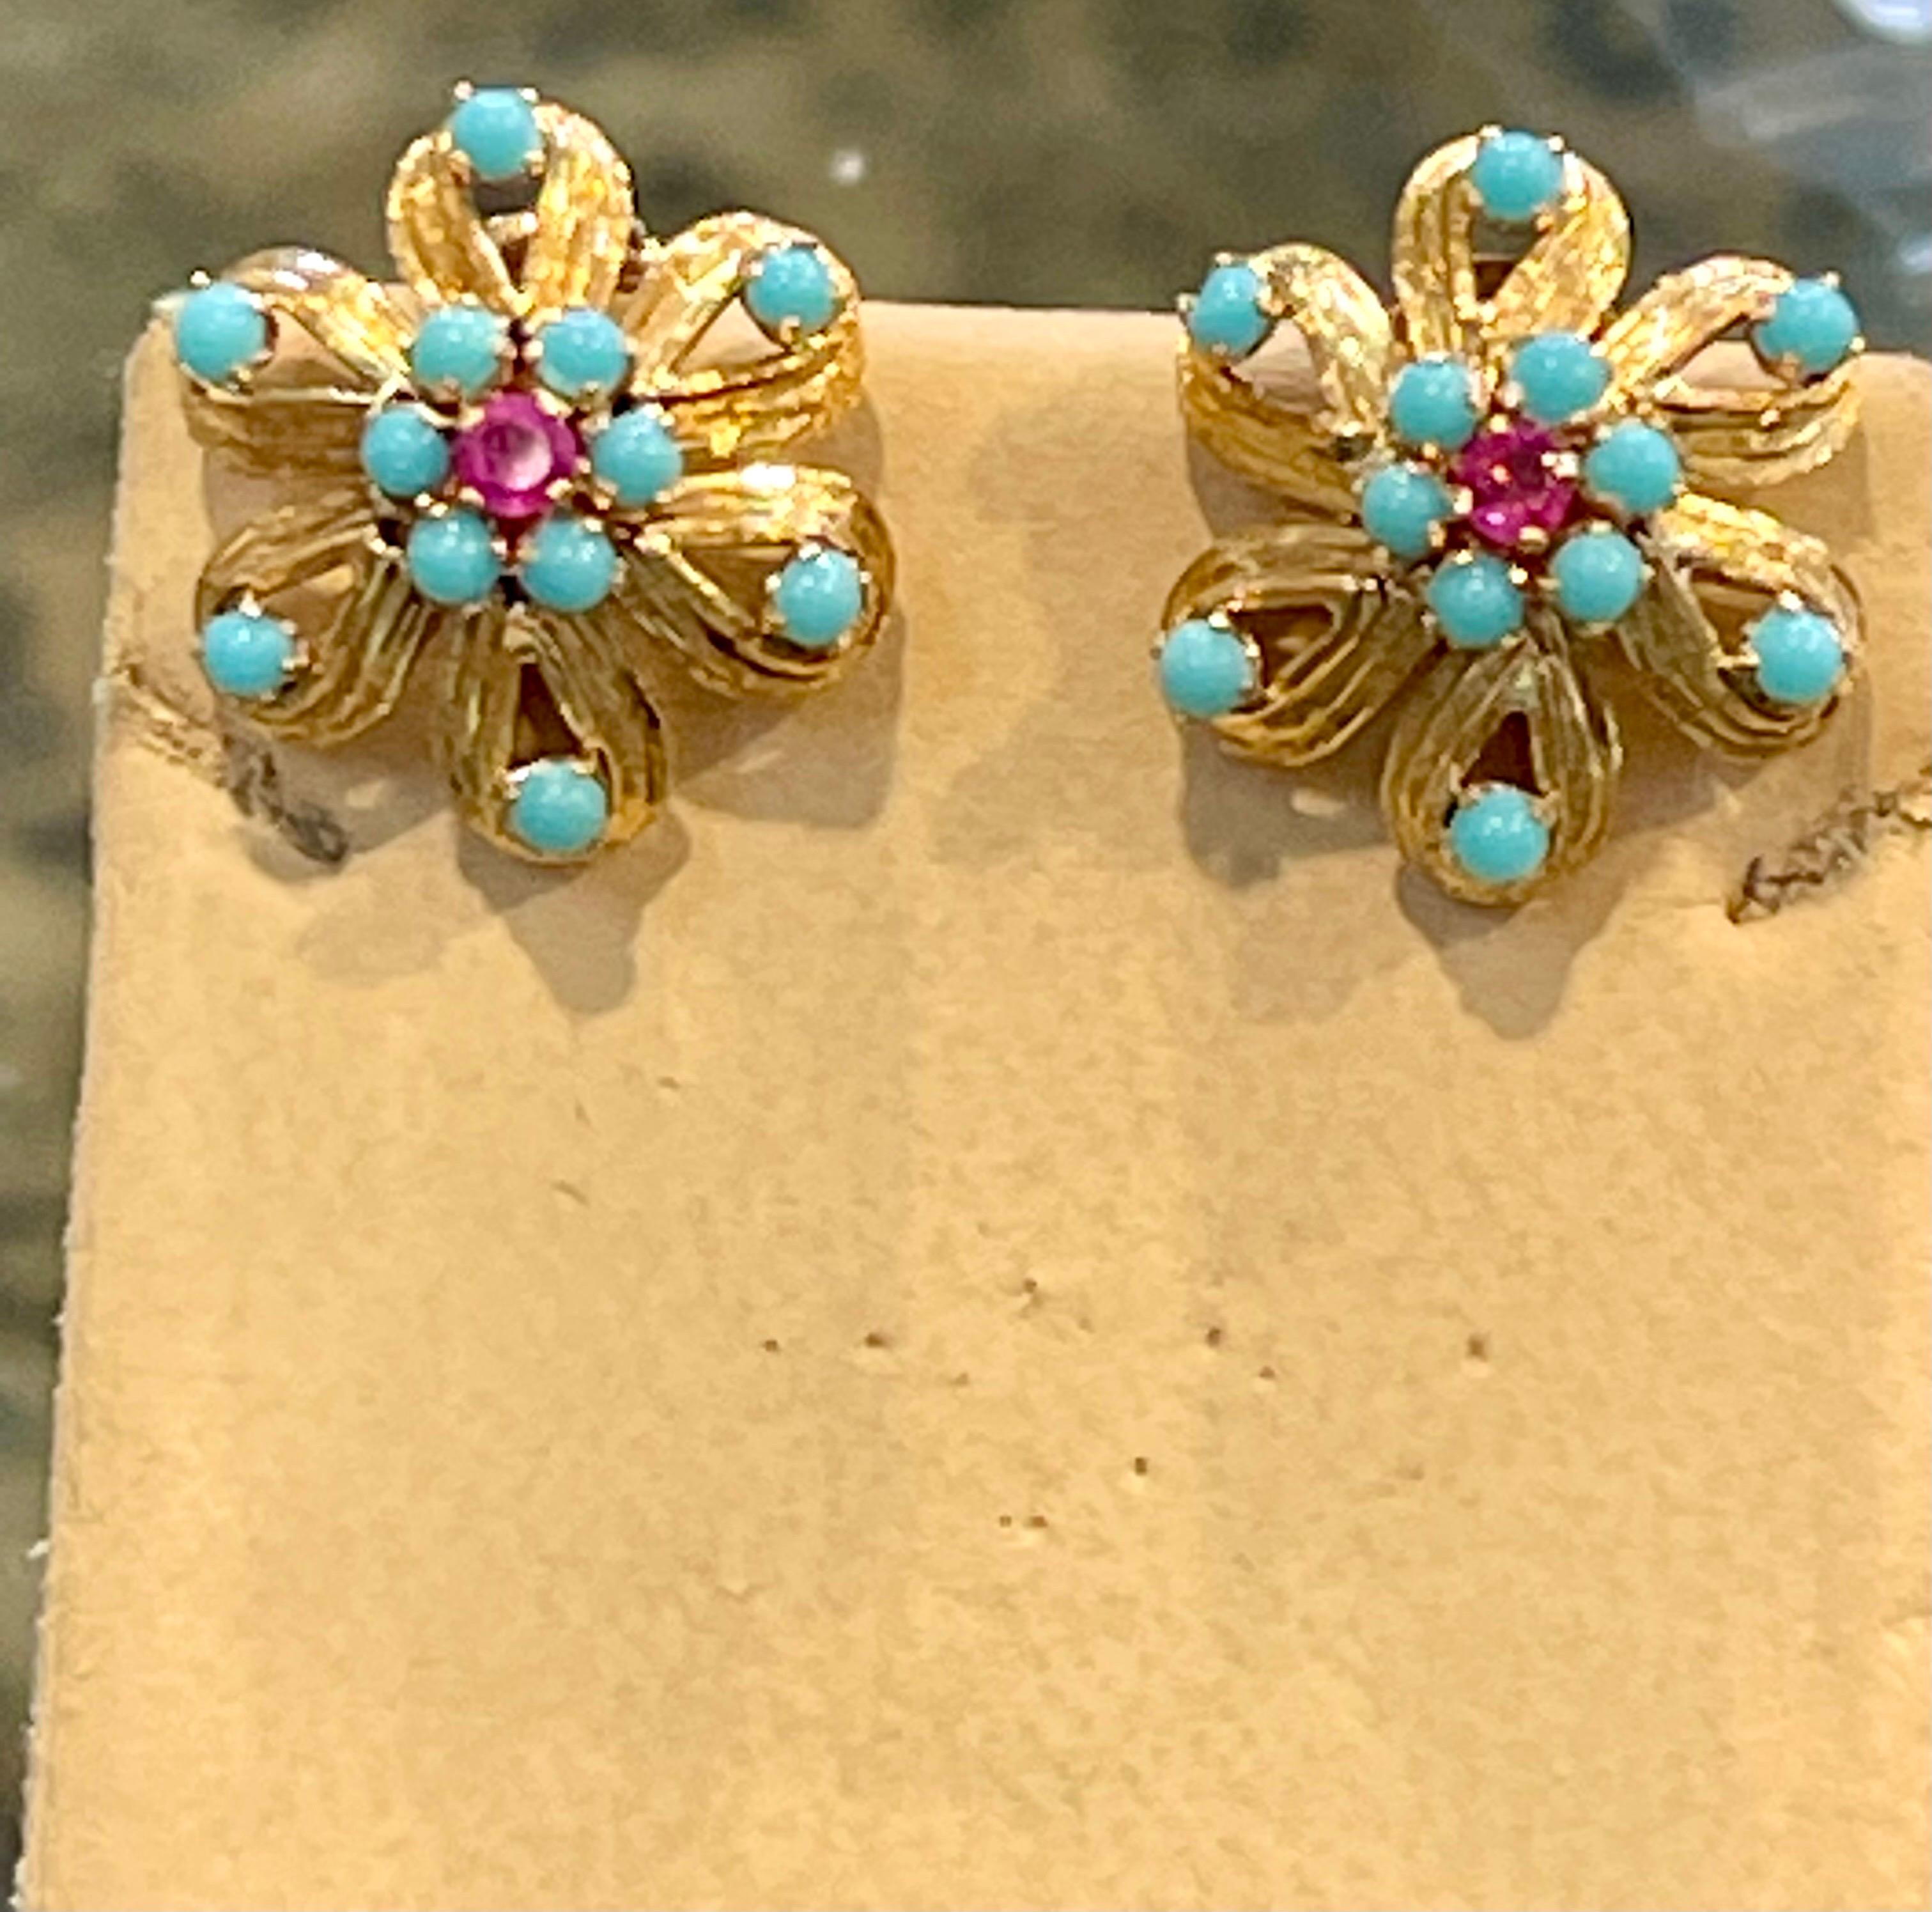 A beautiful suite of Ring and Earring
Approximately 4 Ct Natural Turquoise & Ruby 18 Karat  Yellow Gold Flower Ring & Earring Set 20Gm
 All round Turquoise beads
18 Karat Yellow Gold: 20 Grams
Checked for 18 Karat gold
Ring Size 8  ( can be altered